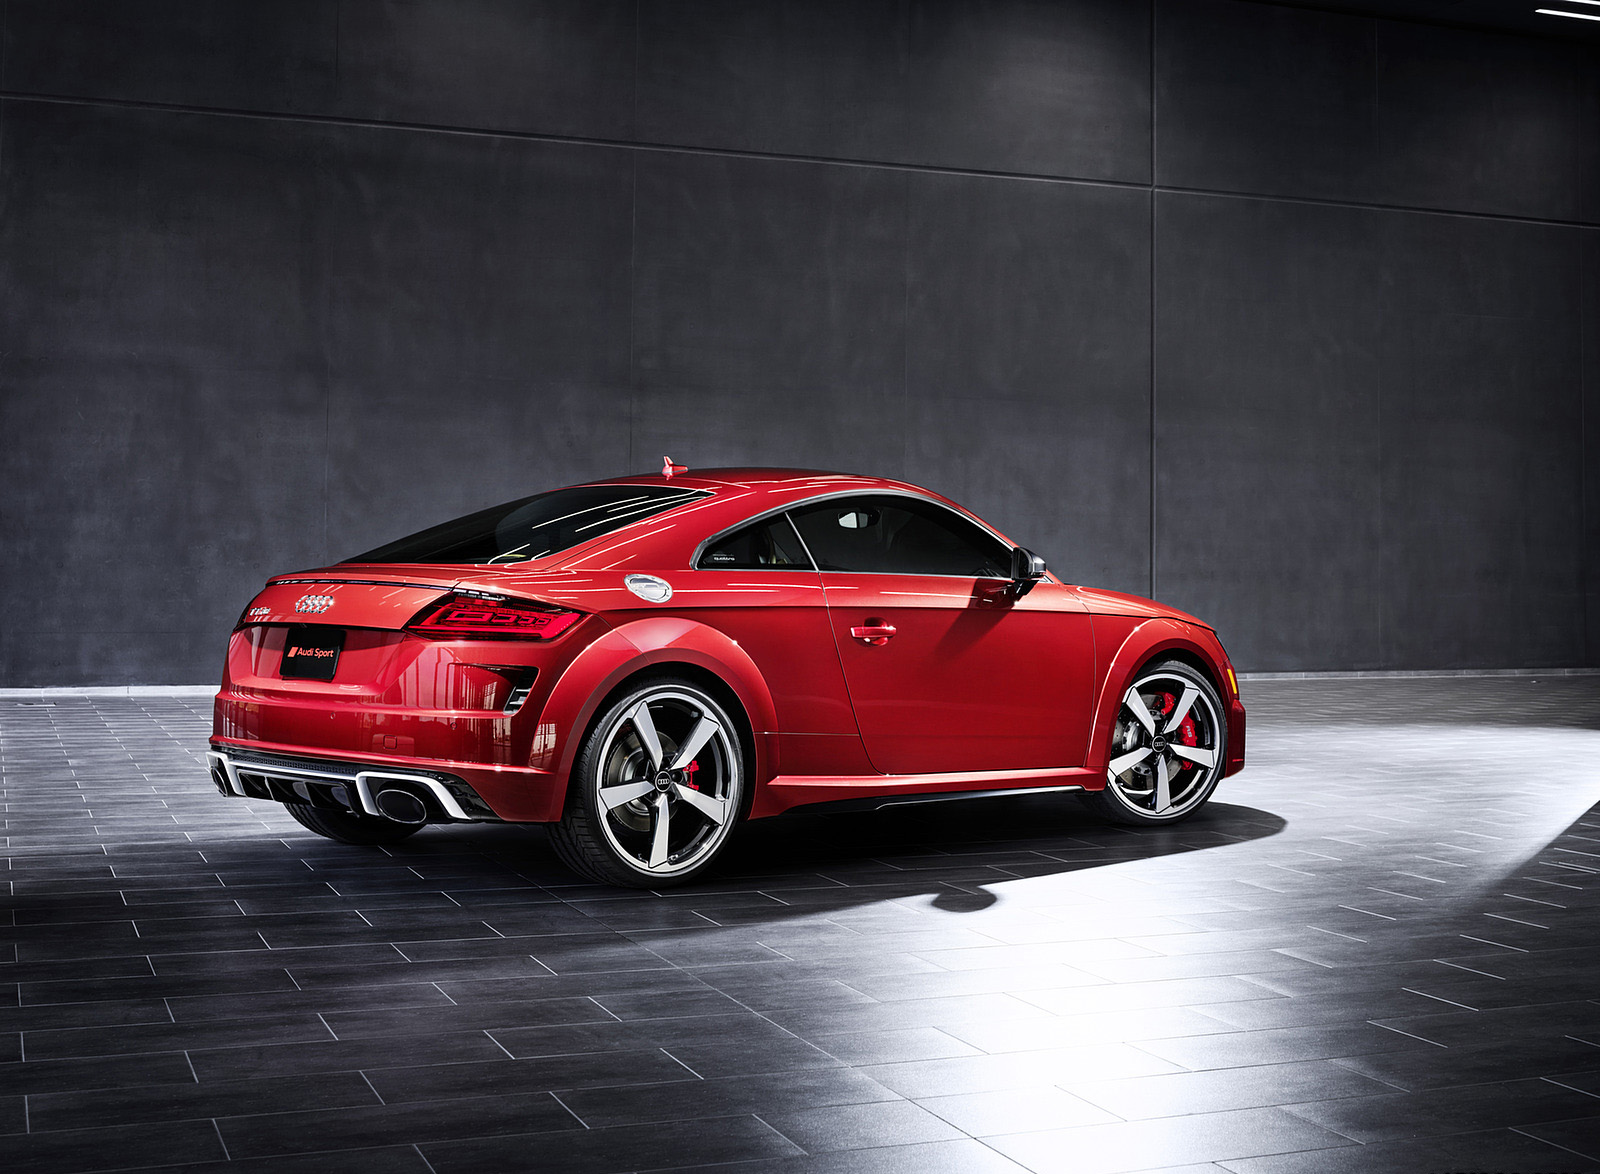 2022 Audi TT RS Heritage Edition (Color: Tizian Red) Rear Three-Quarter Wallpapers #11 of 14